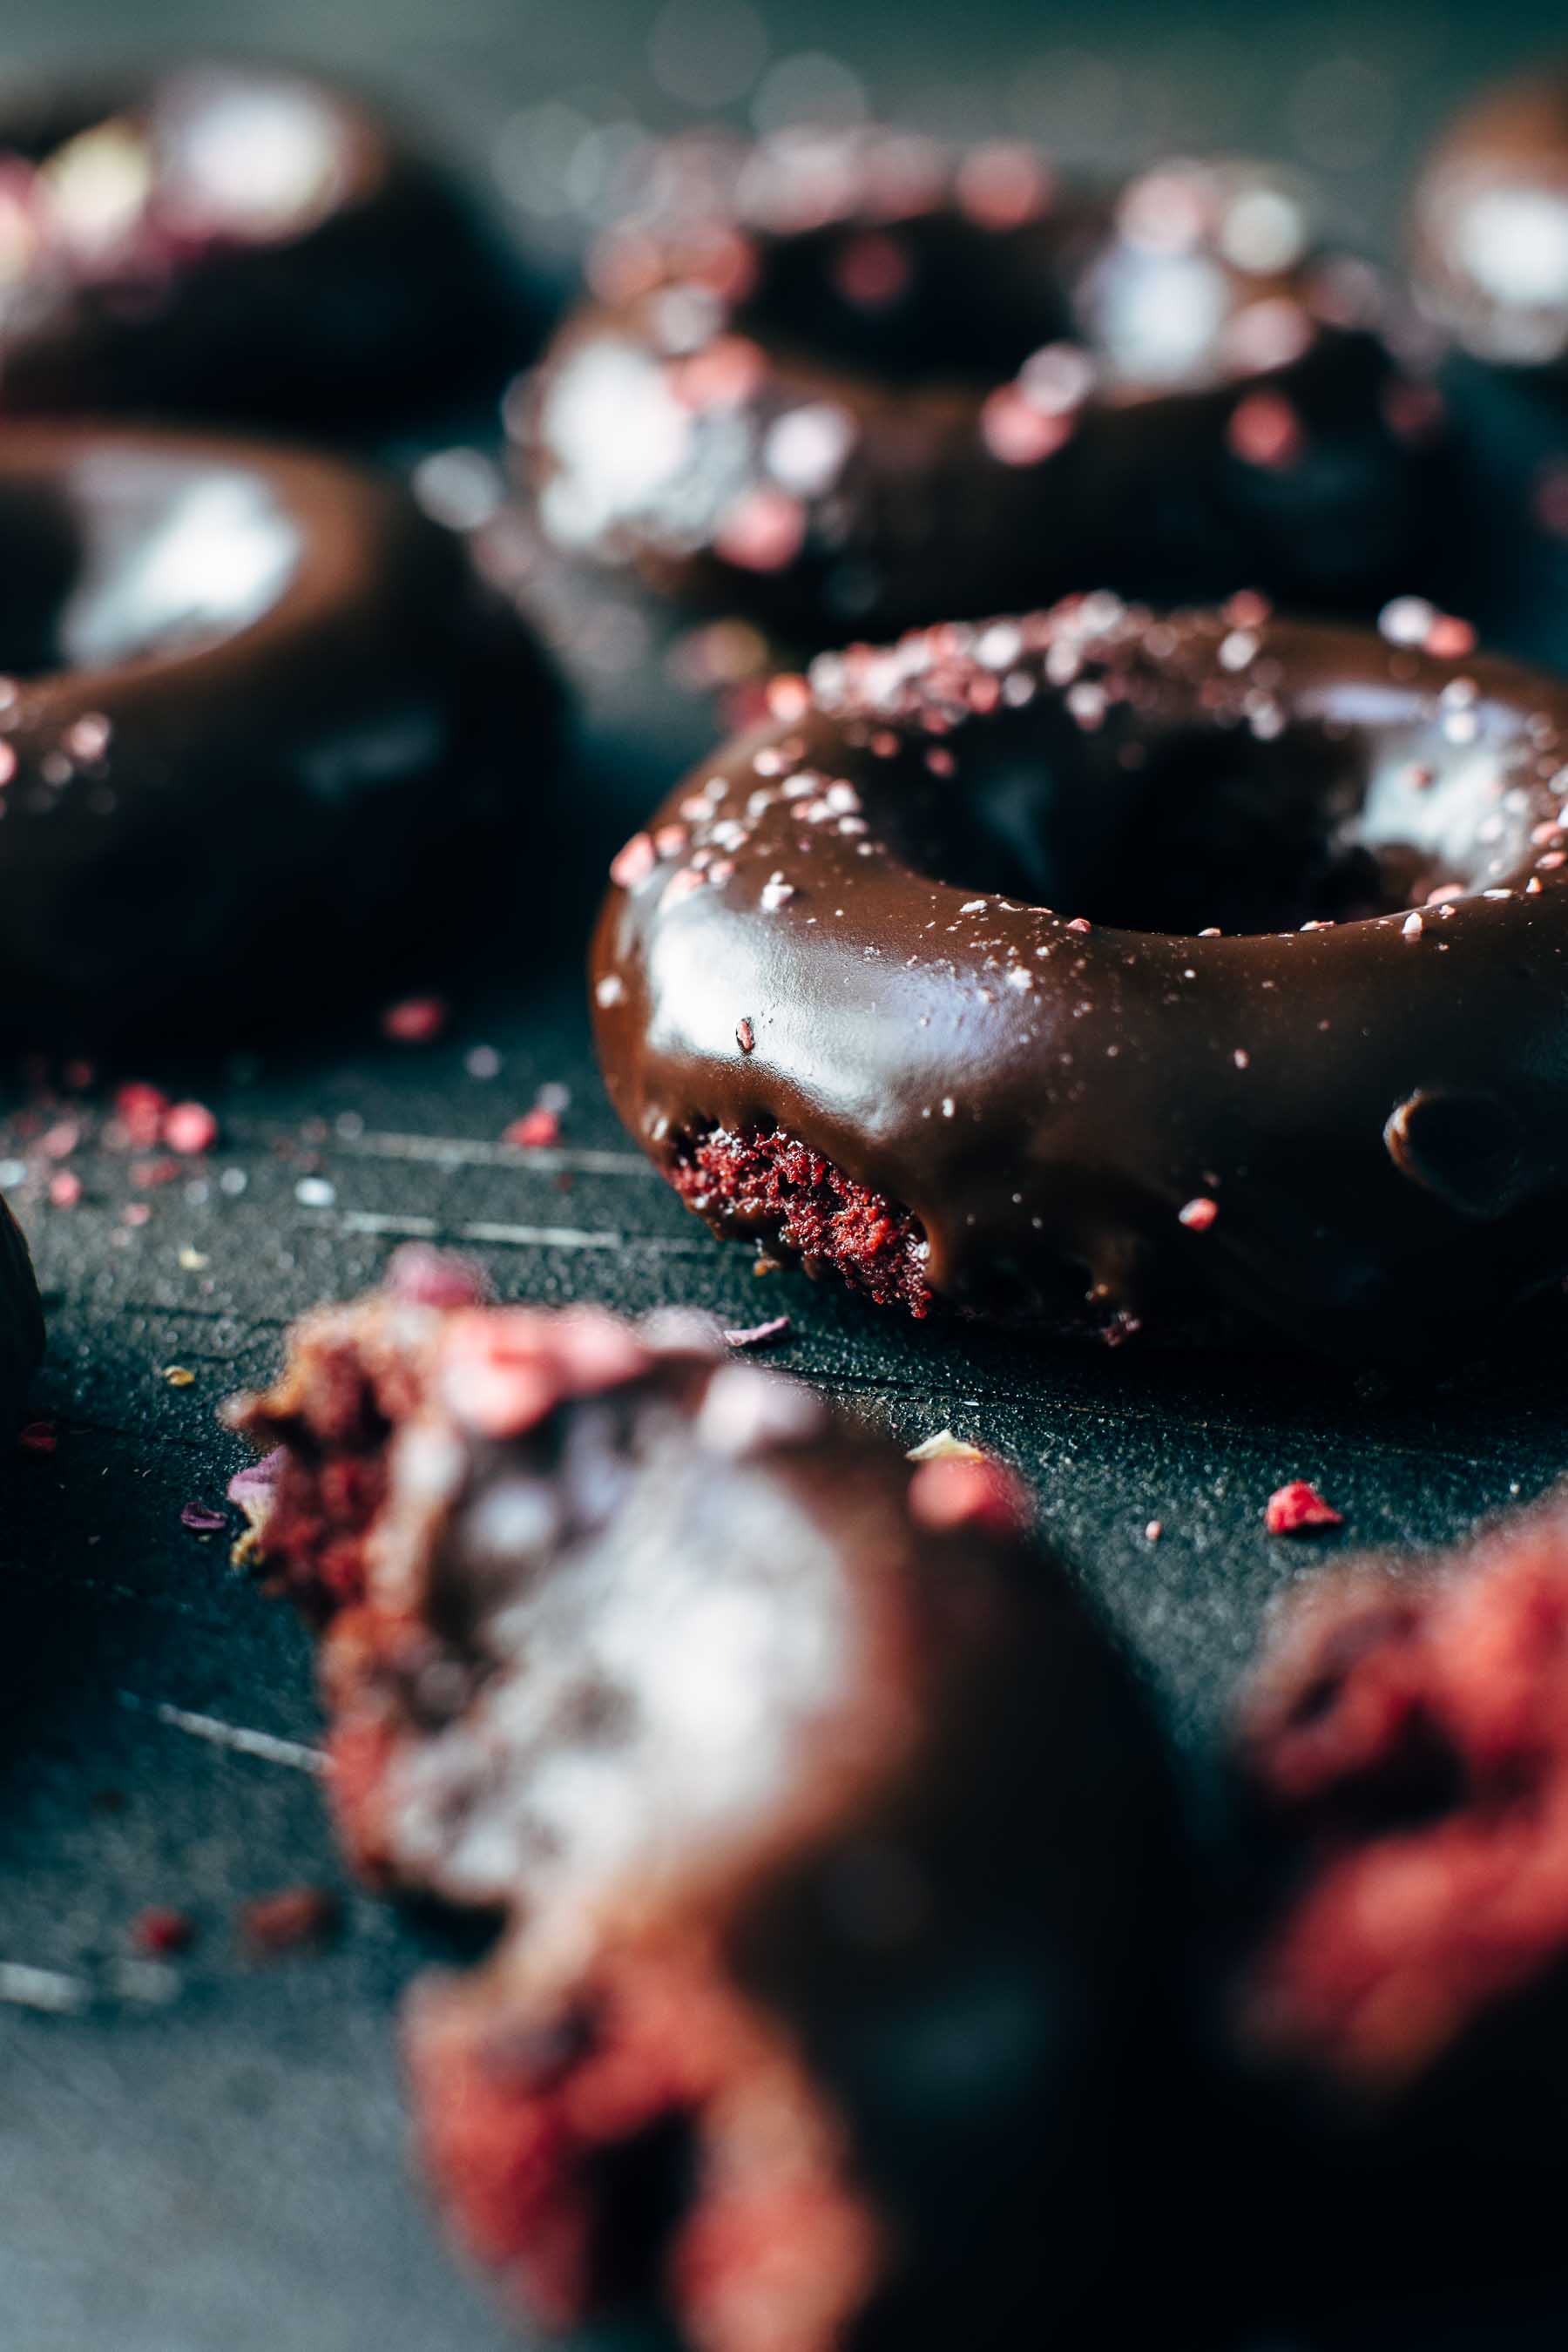 Red colored cake donuts glazed with chocolate on a dark table